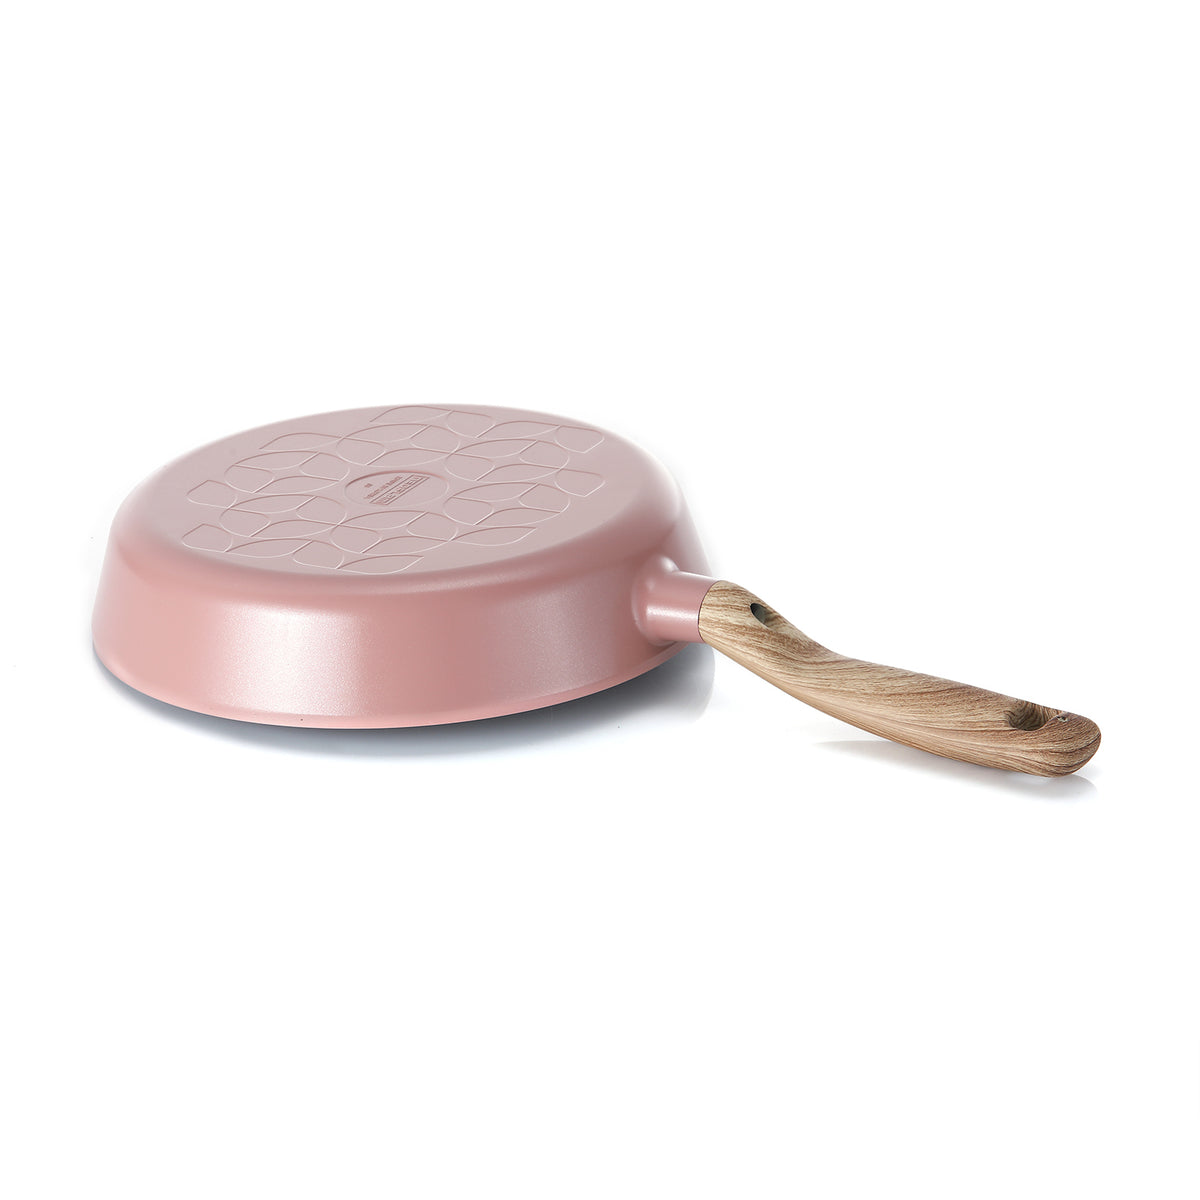 Neoflam Retro 28cm Fry Pan Induction Pink Demer